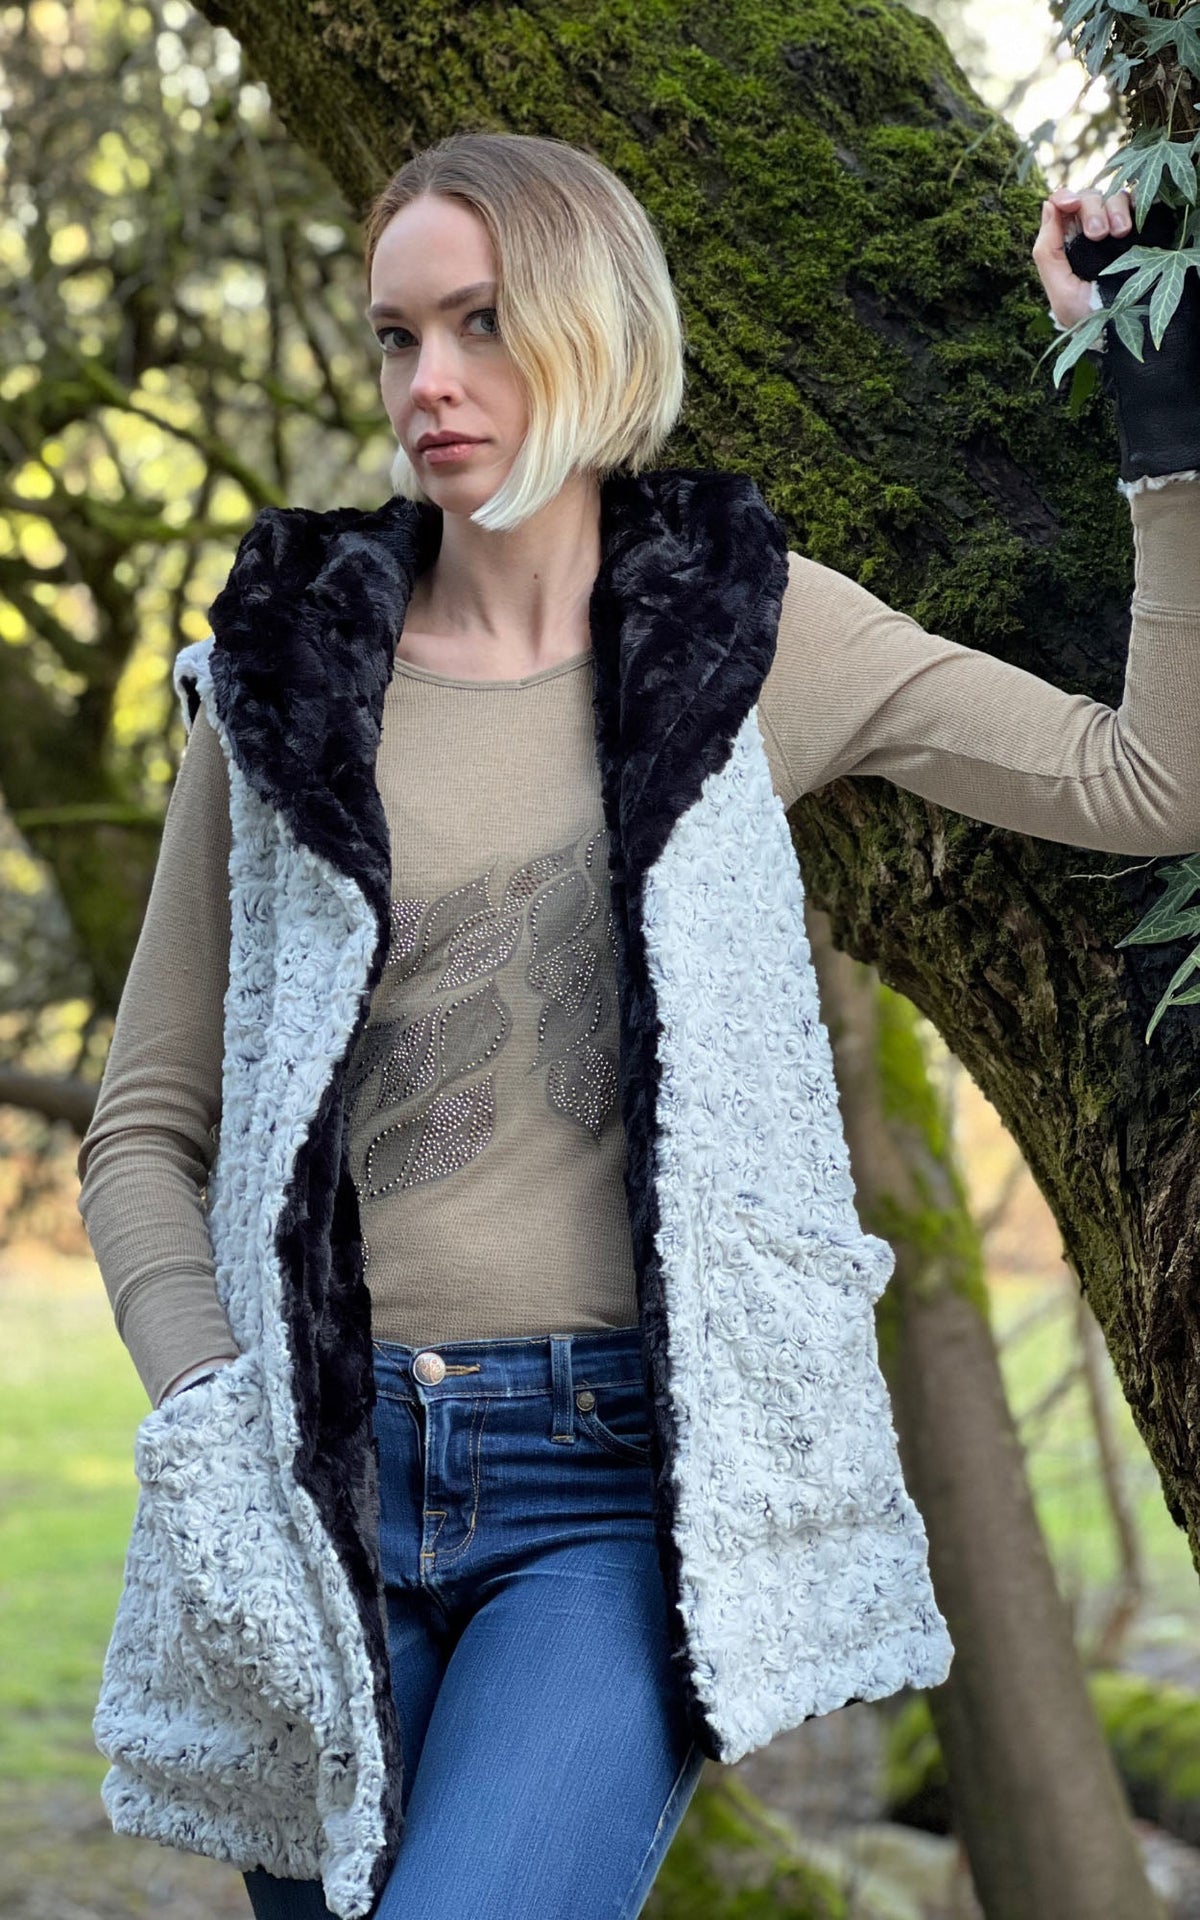 Woman modeling the Oversized Hooded Vest in Rosebud Black Faux Fur with Cuddly Black  on reverse. Handmade by Pandemonium Seattle.